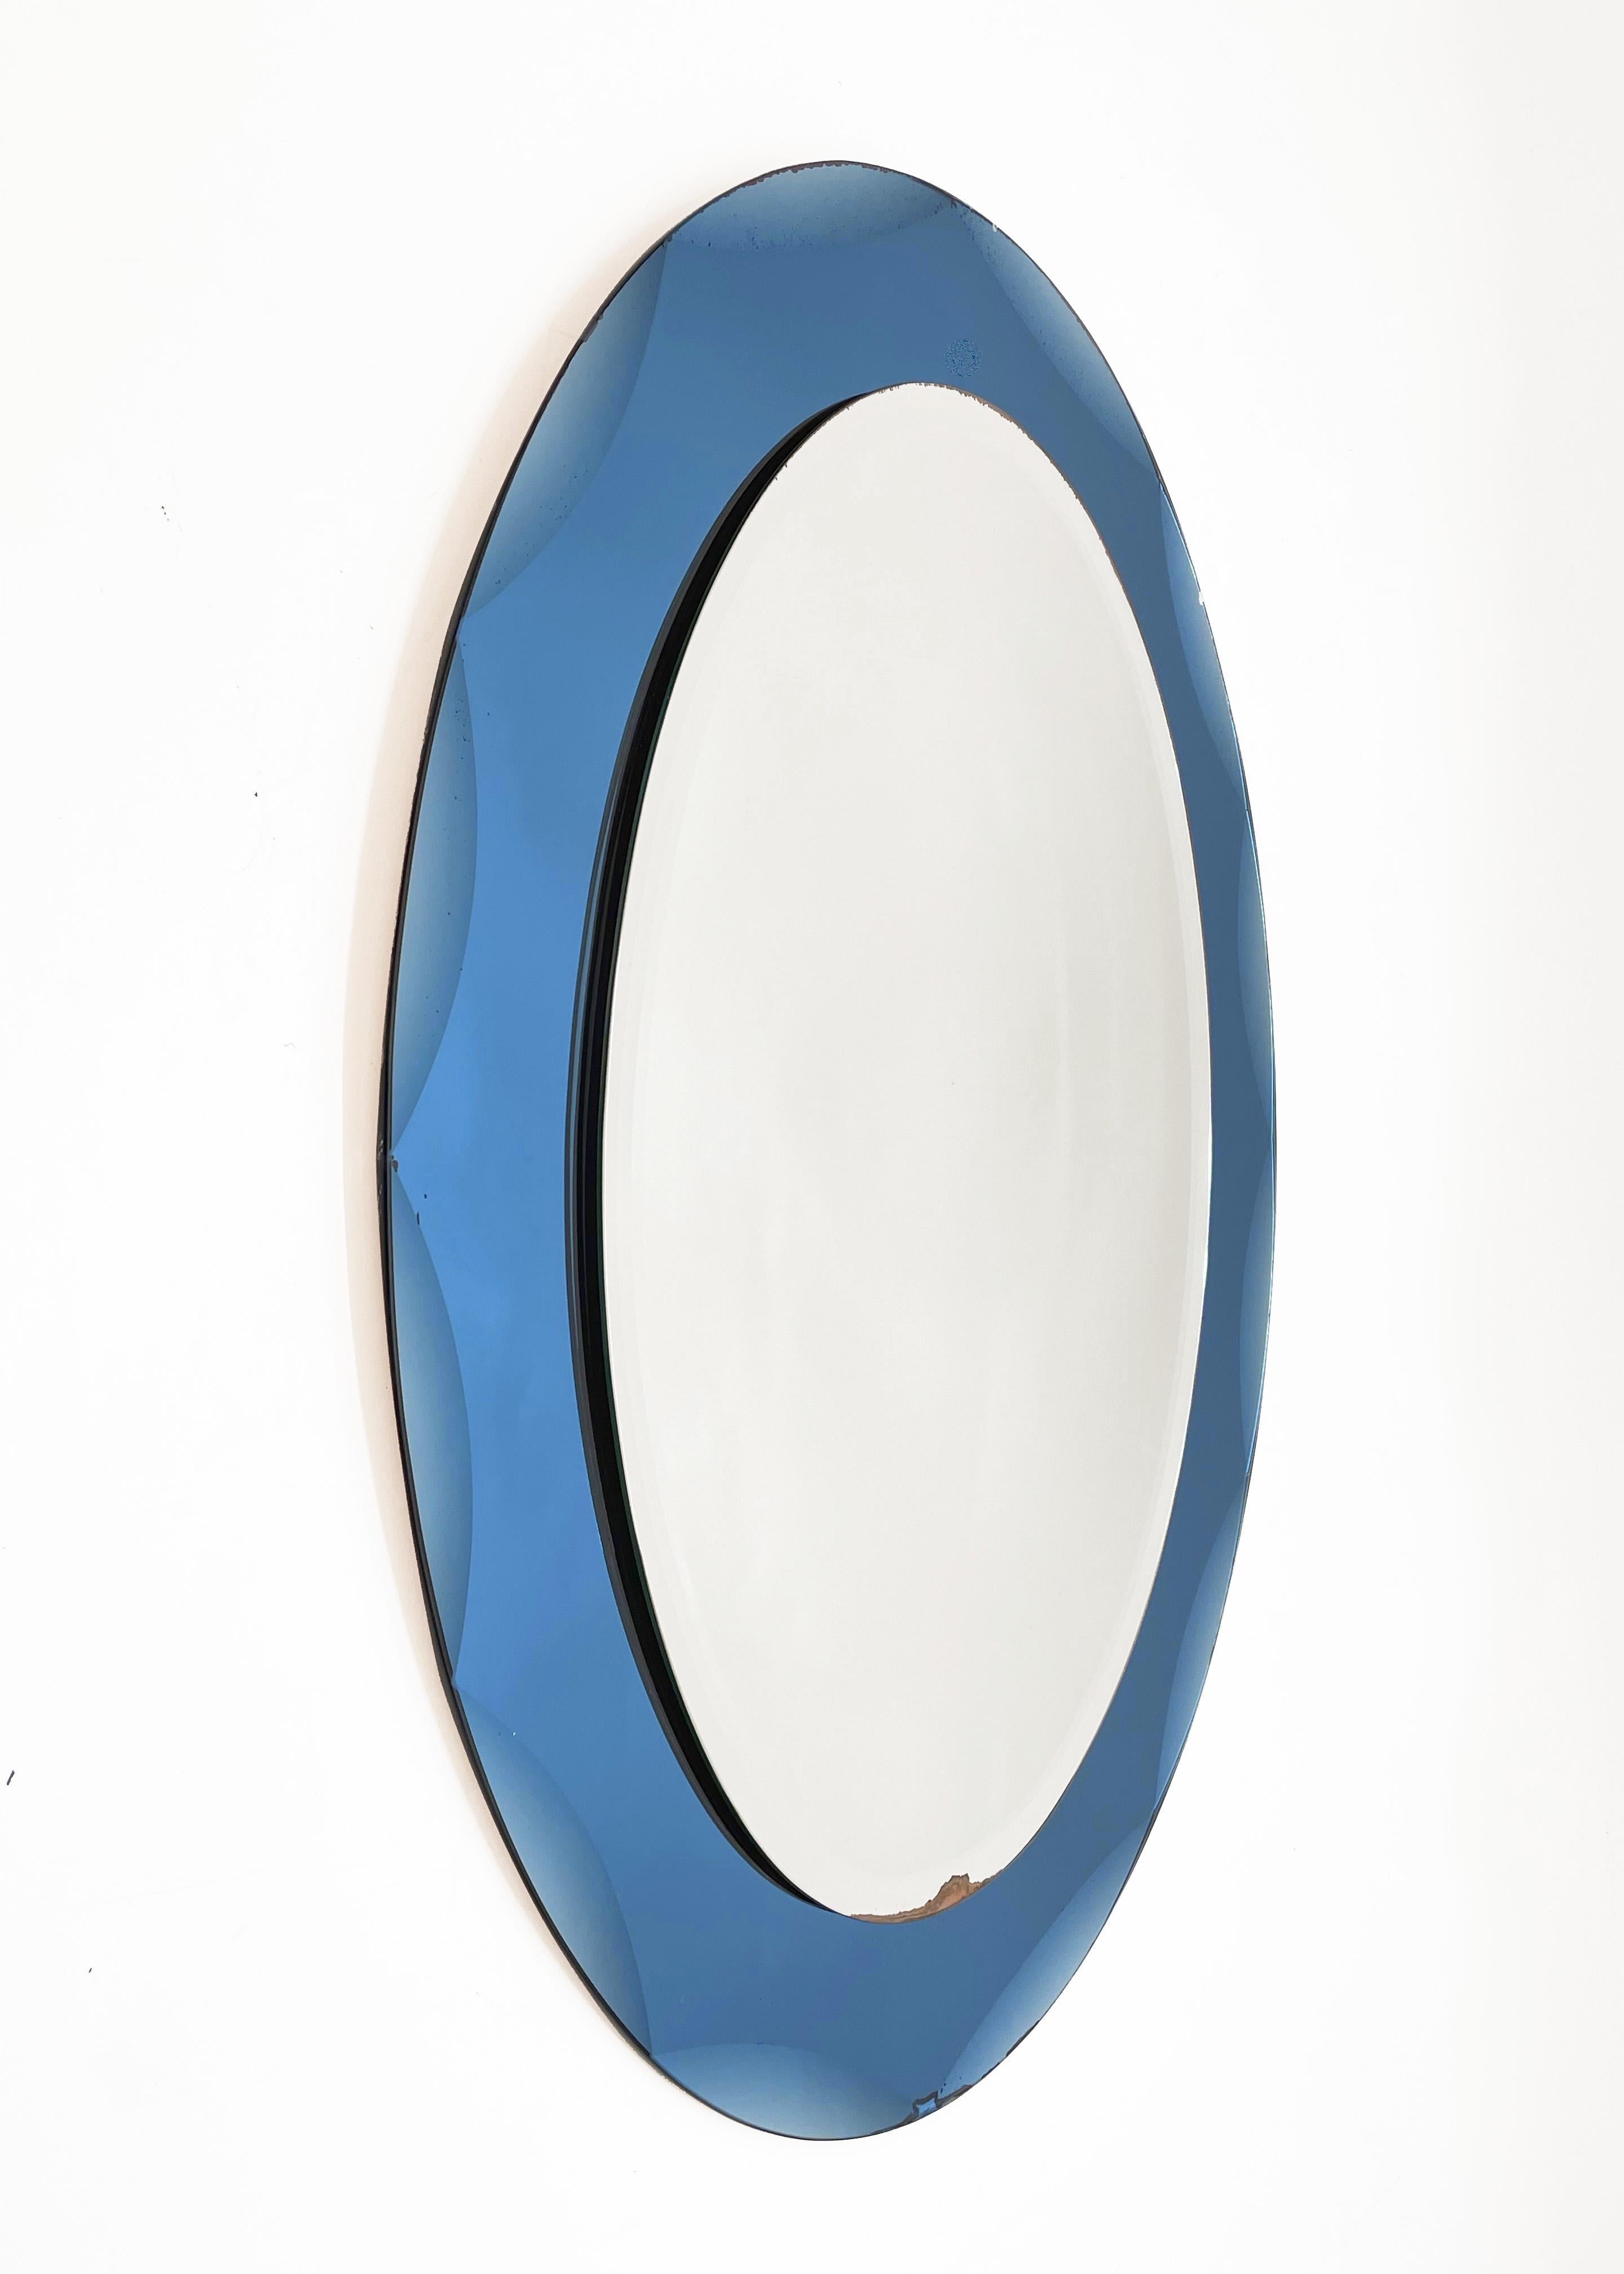 Midcentury Cristal Arte Italian Oval Mirror with Graven Blue Frame, 1960s For Sale 2